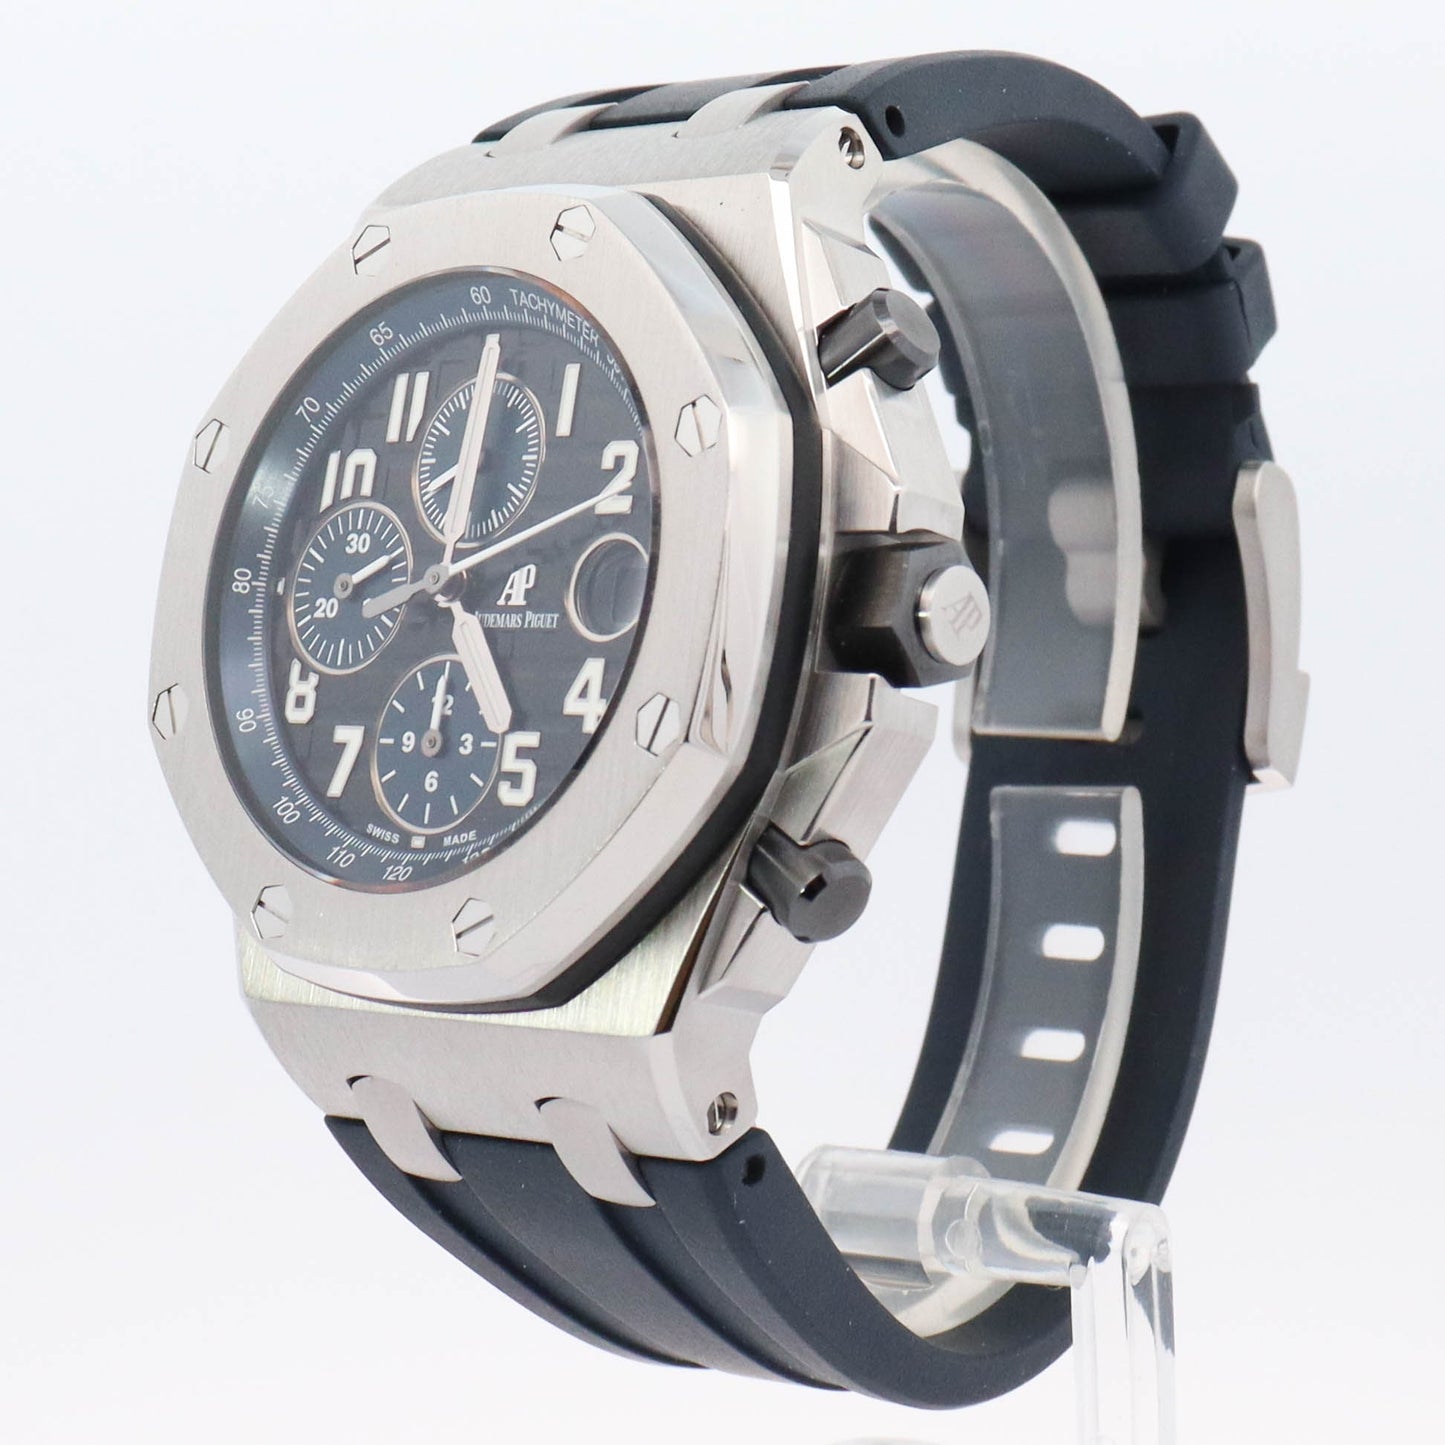 Audemars Piguet Royal Oak Offshore Stainless Steel 42mm Brown Chronograph Dial Watch Reference# 26470ST.OO.A028CR.01